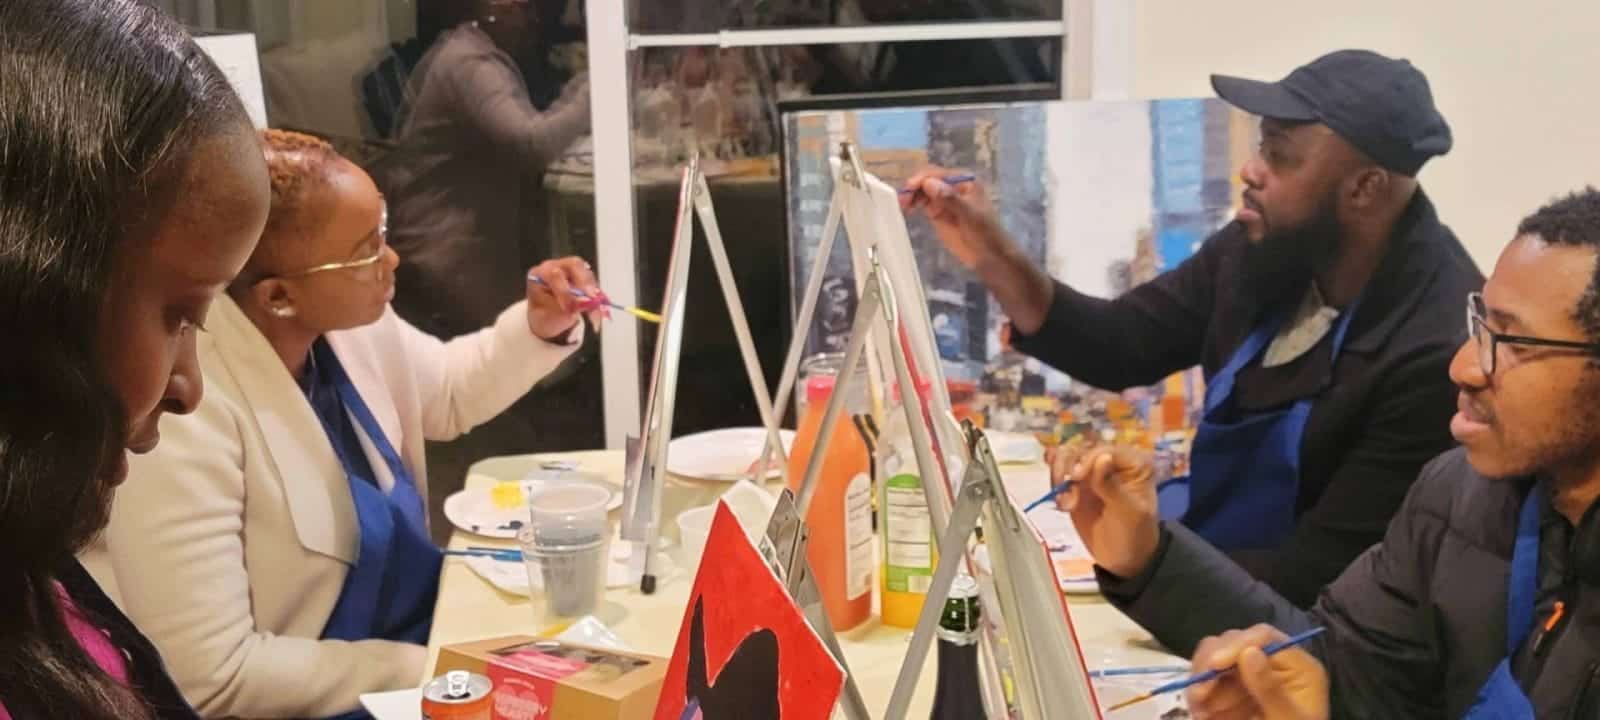 A paint and sip experience in Washington DC where a group of people gather to create art on easels.